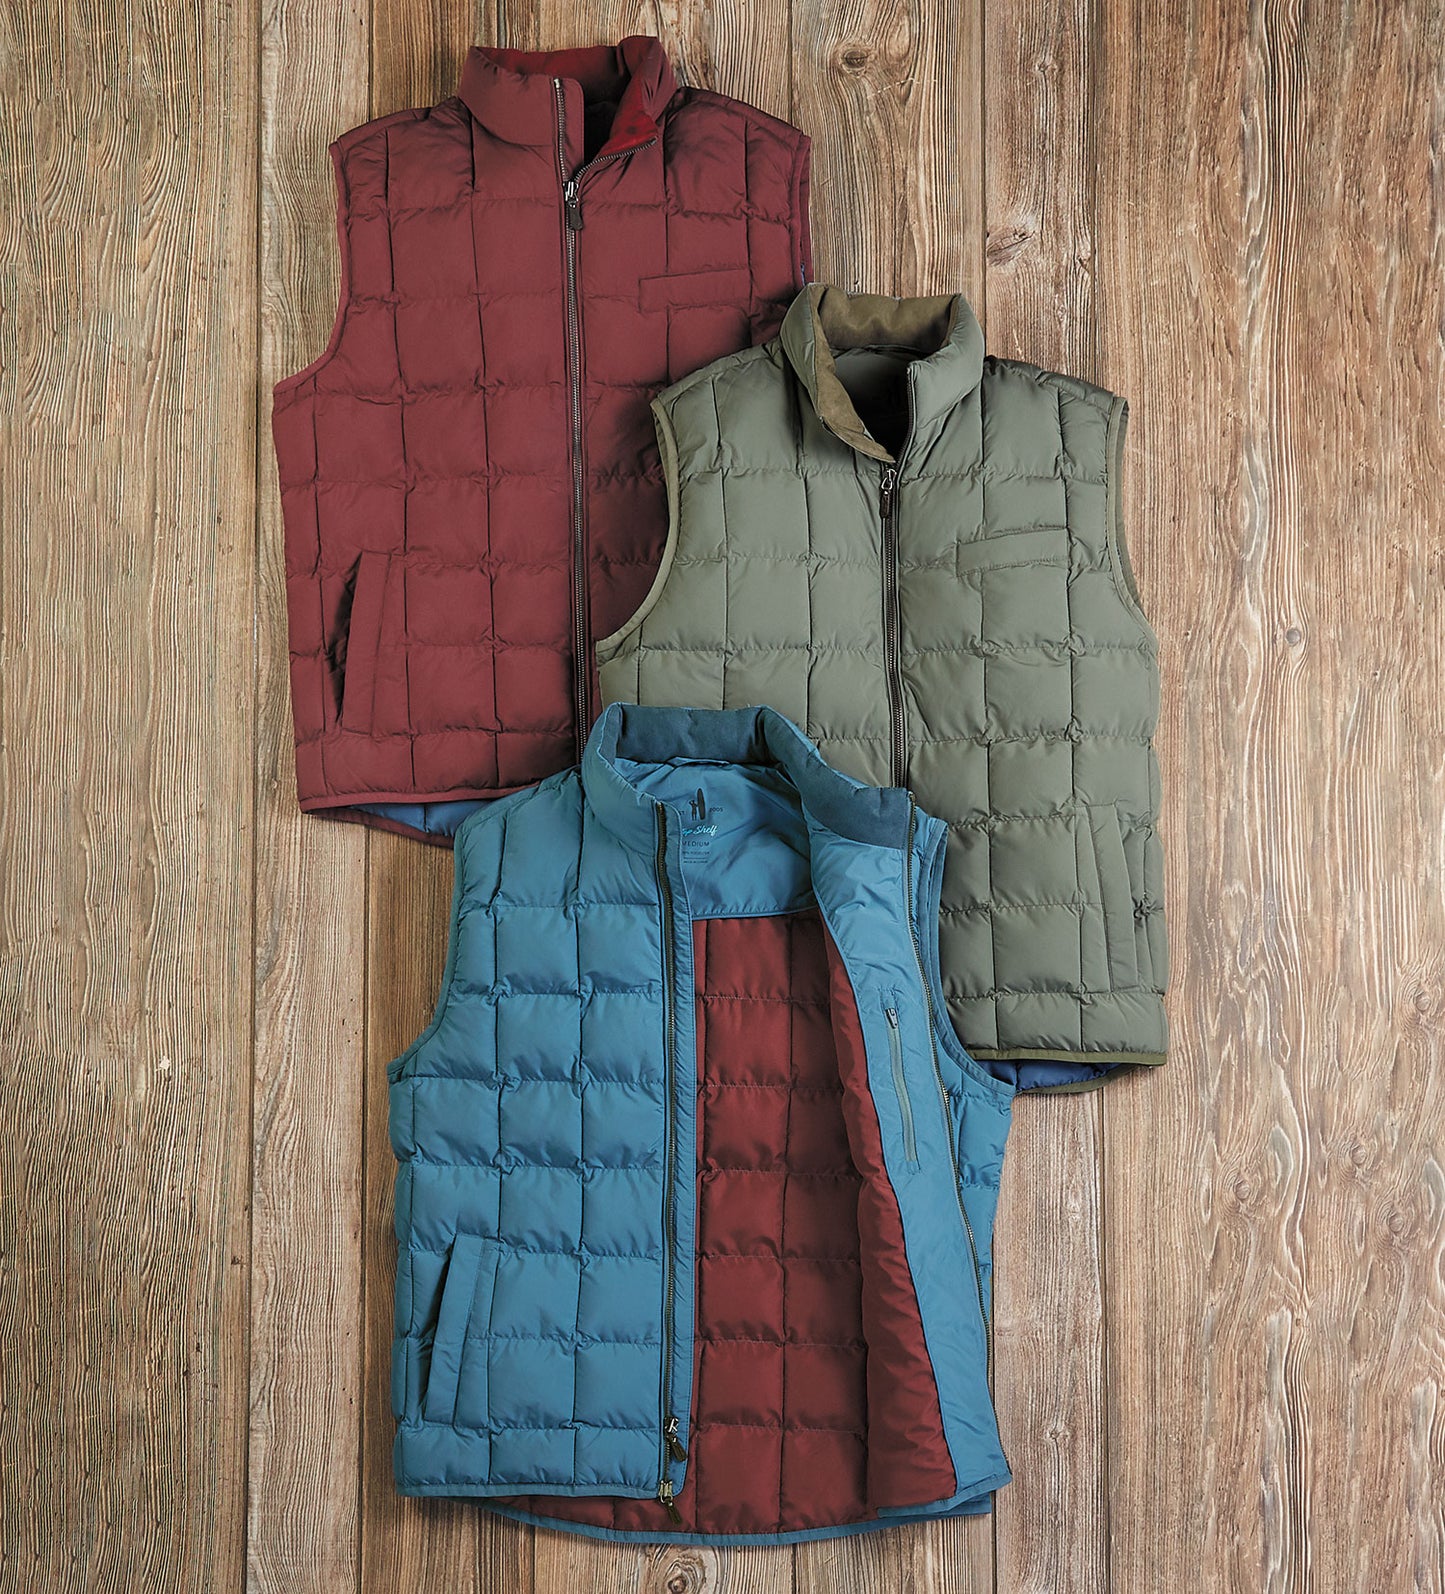 Johnnie-O Enfield Quilted Vest